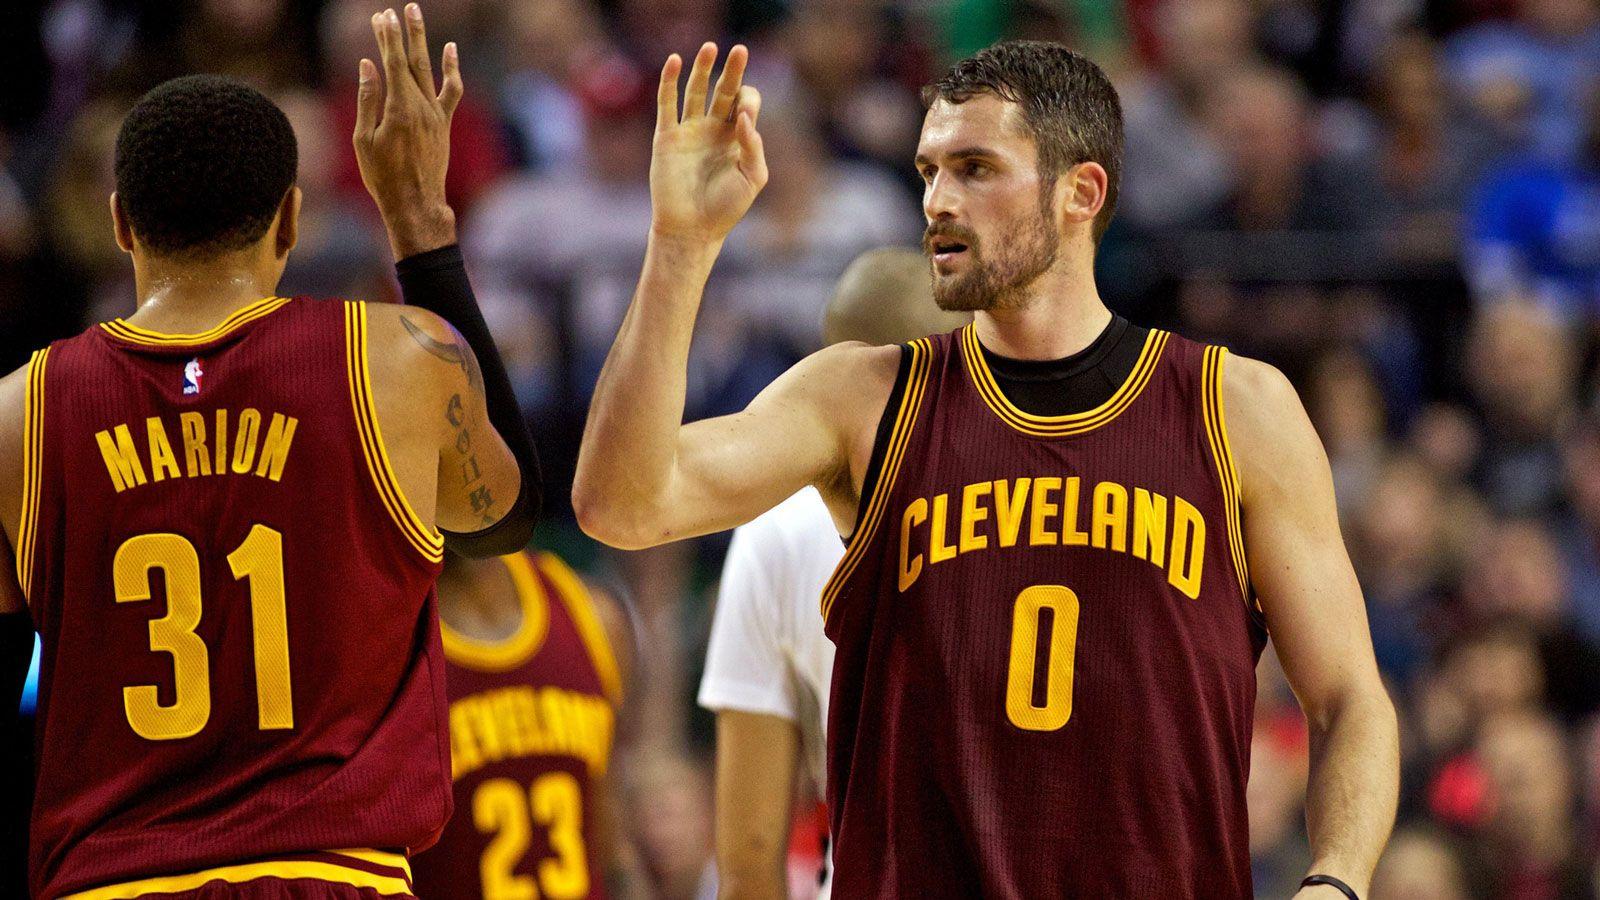 Kevin Love Wallpaper Cavs image free download 1600x900